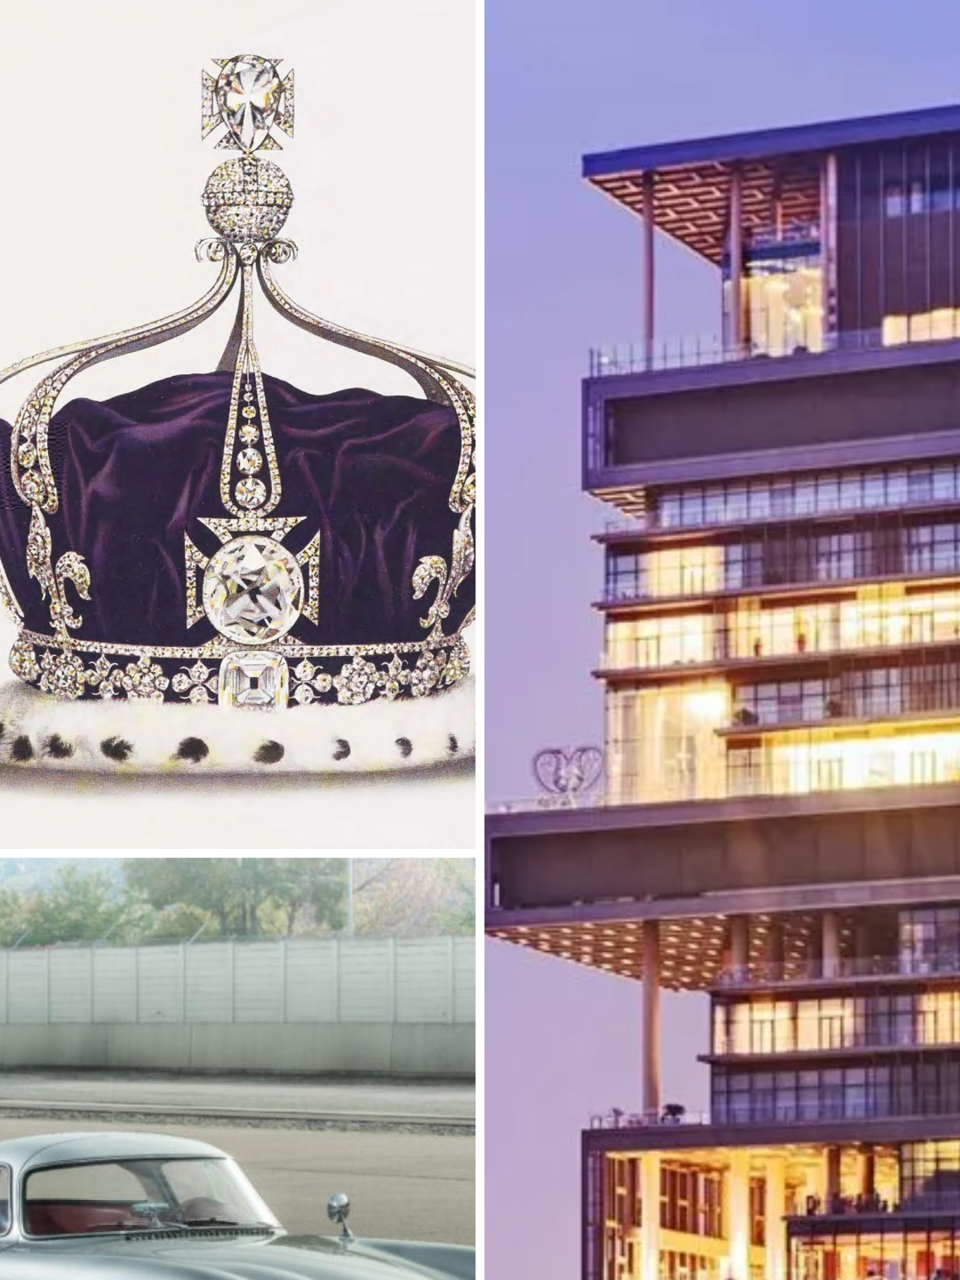 9 Most Expensive Things in The World 